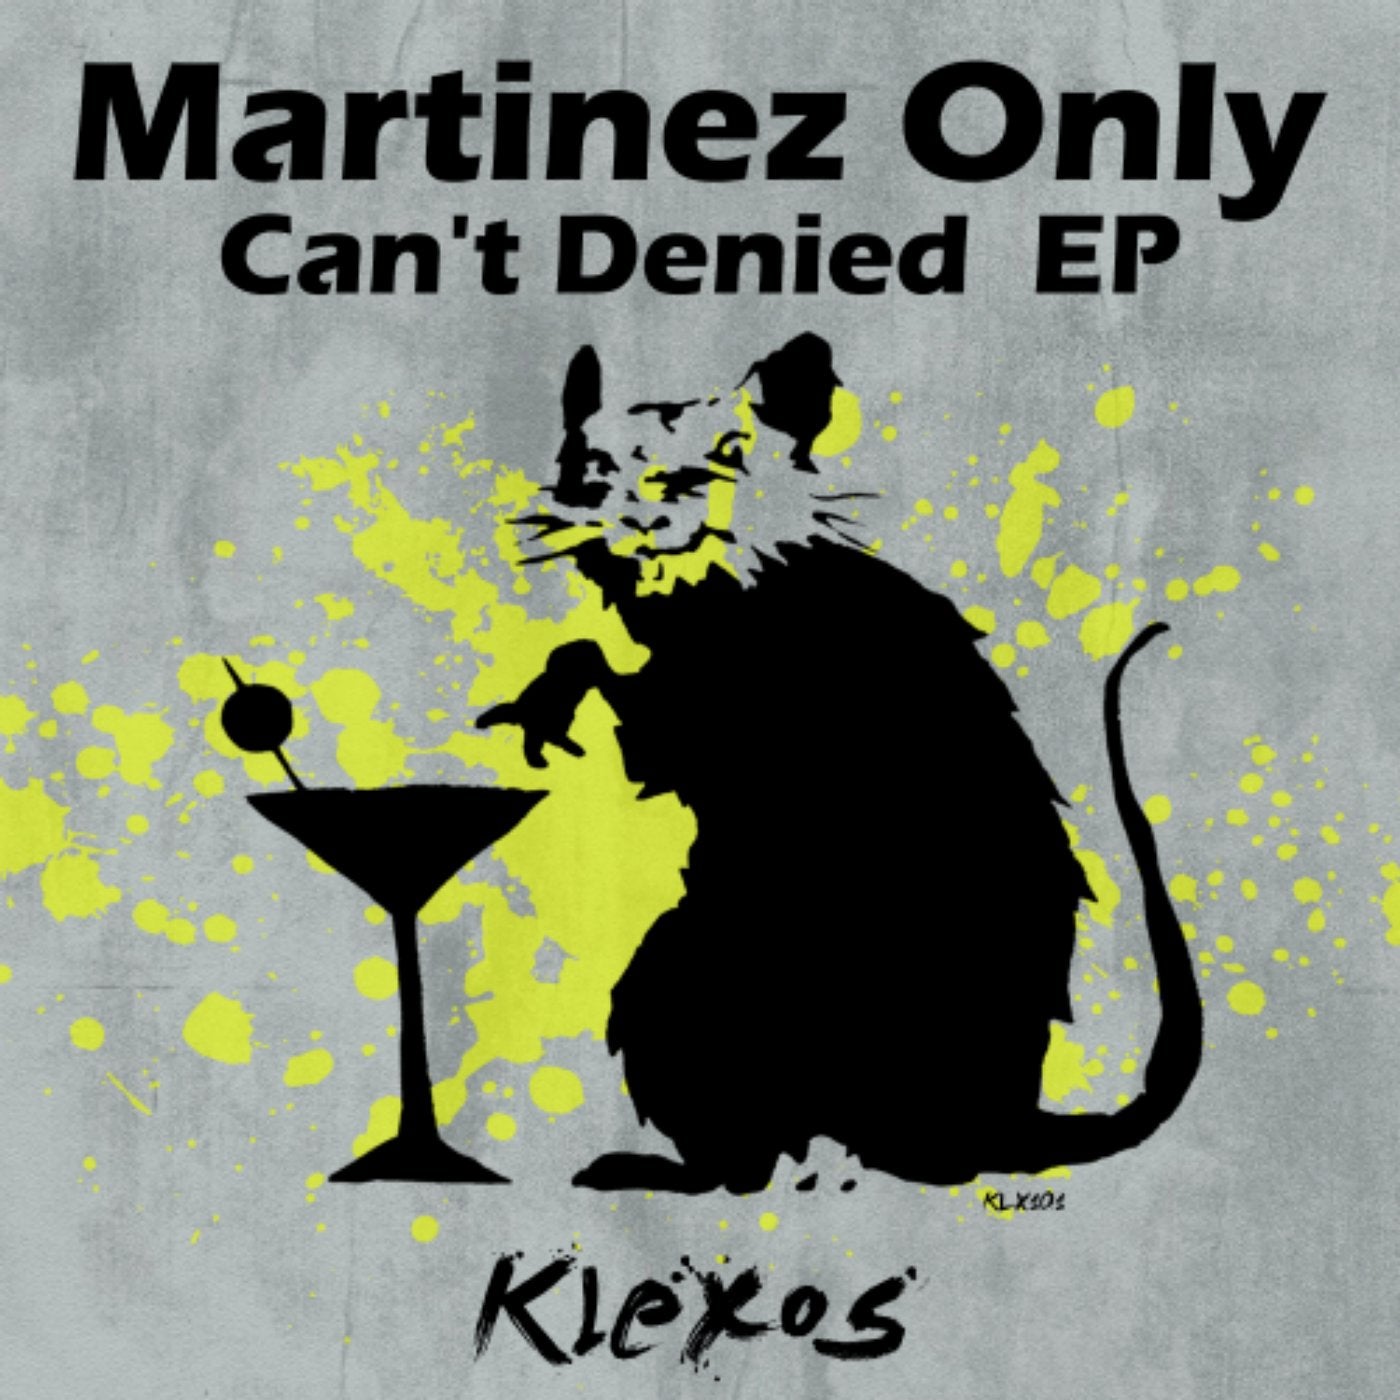 Can't Denied EP